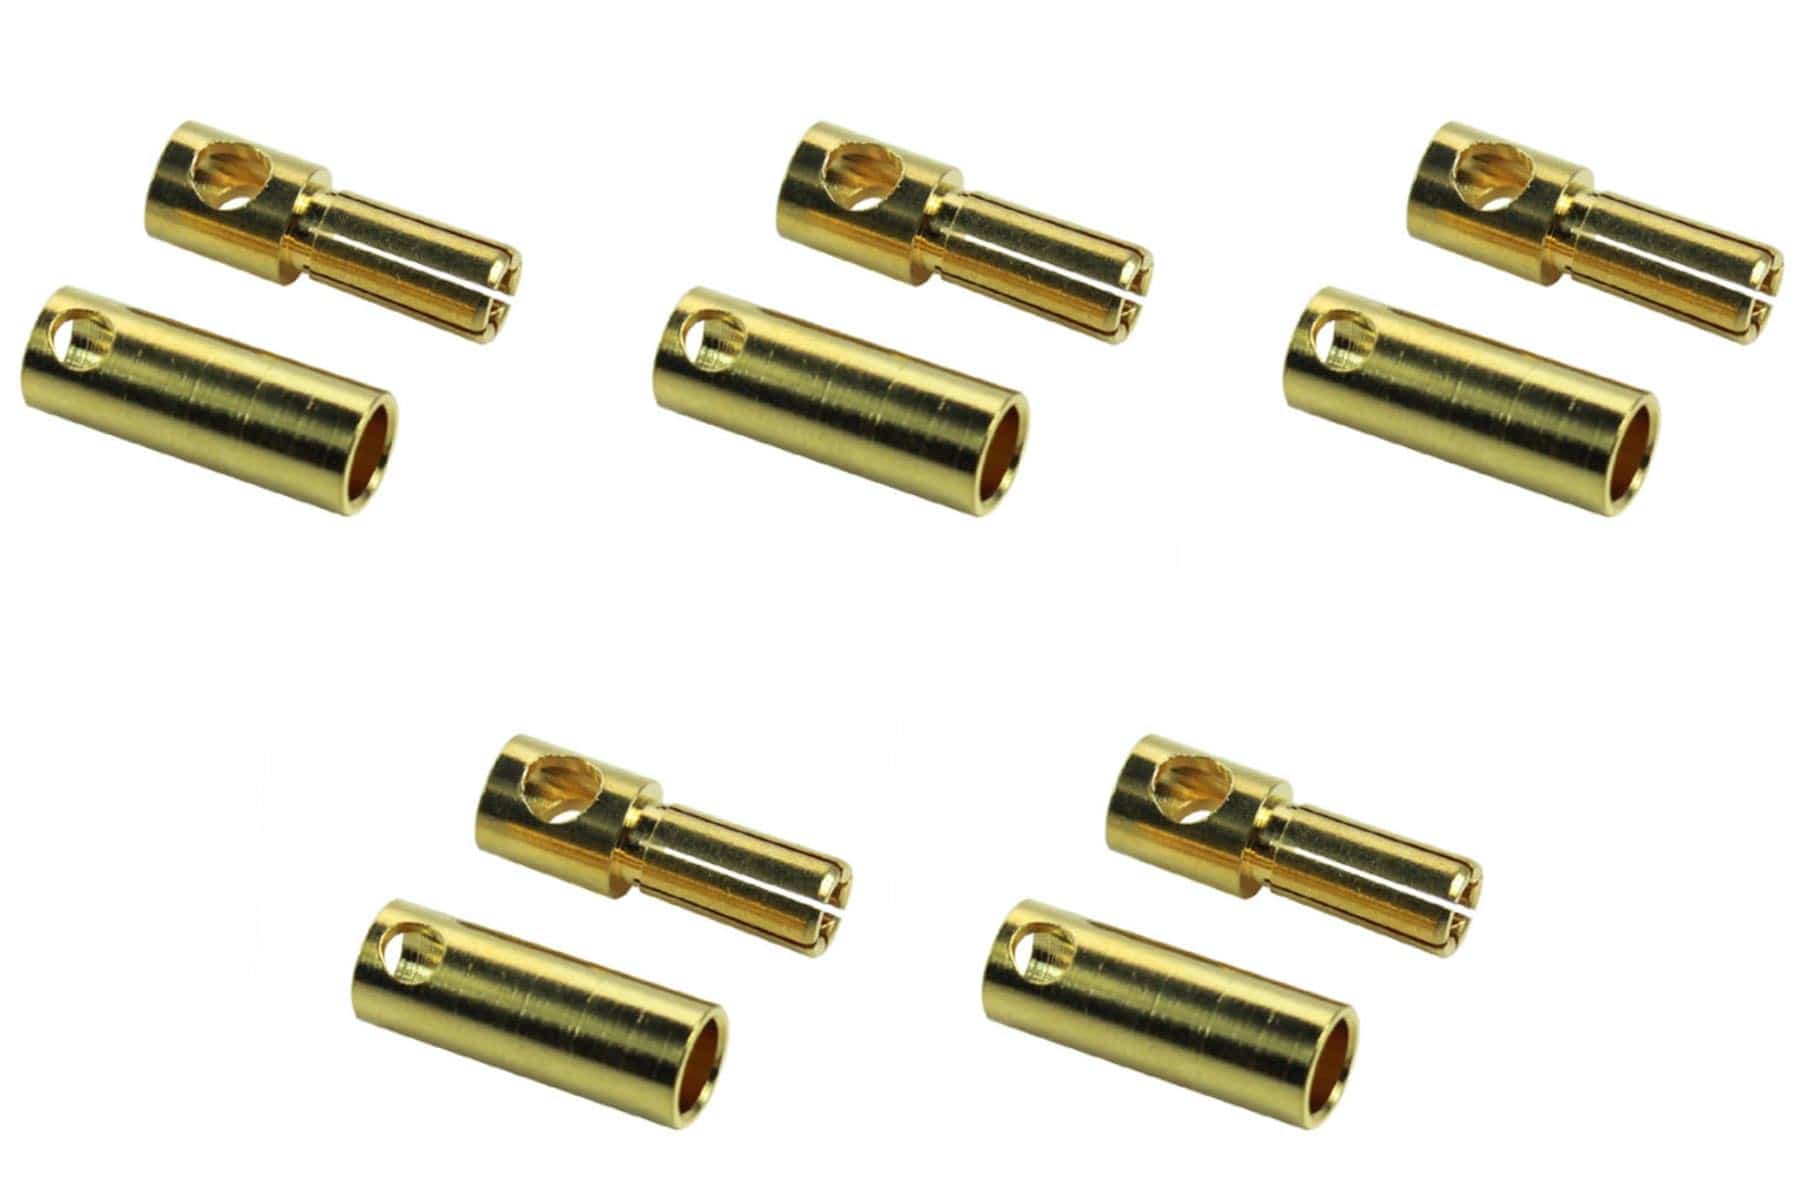 BenchCraft 5.5mm Gold Bullet ESC and Motor Connectors (5 Pairs) BCT5062-031